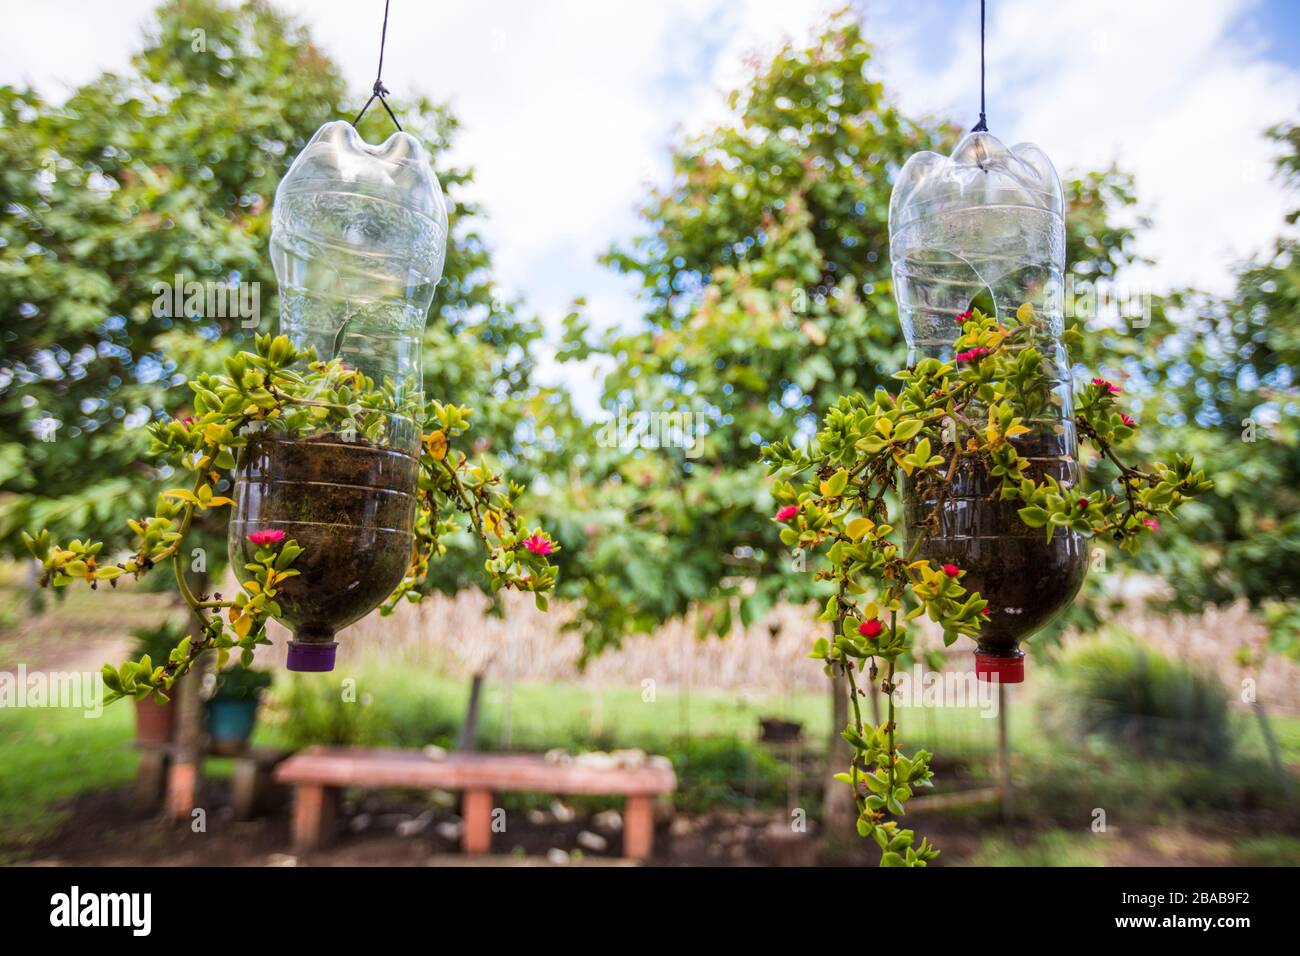 Plastic bottles reused as hanging planters. Stock Photo